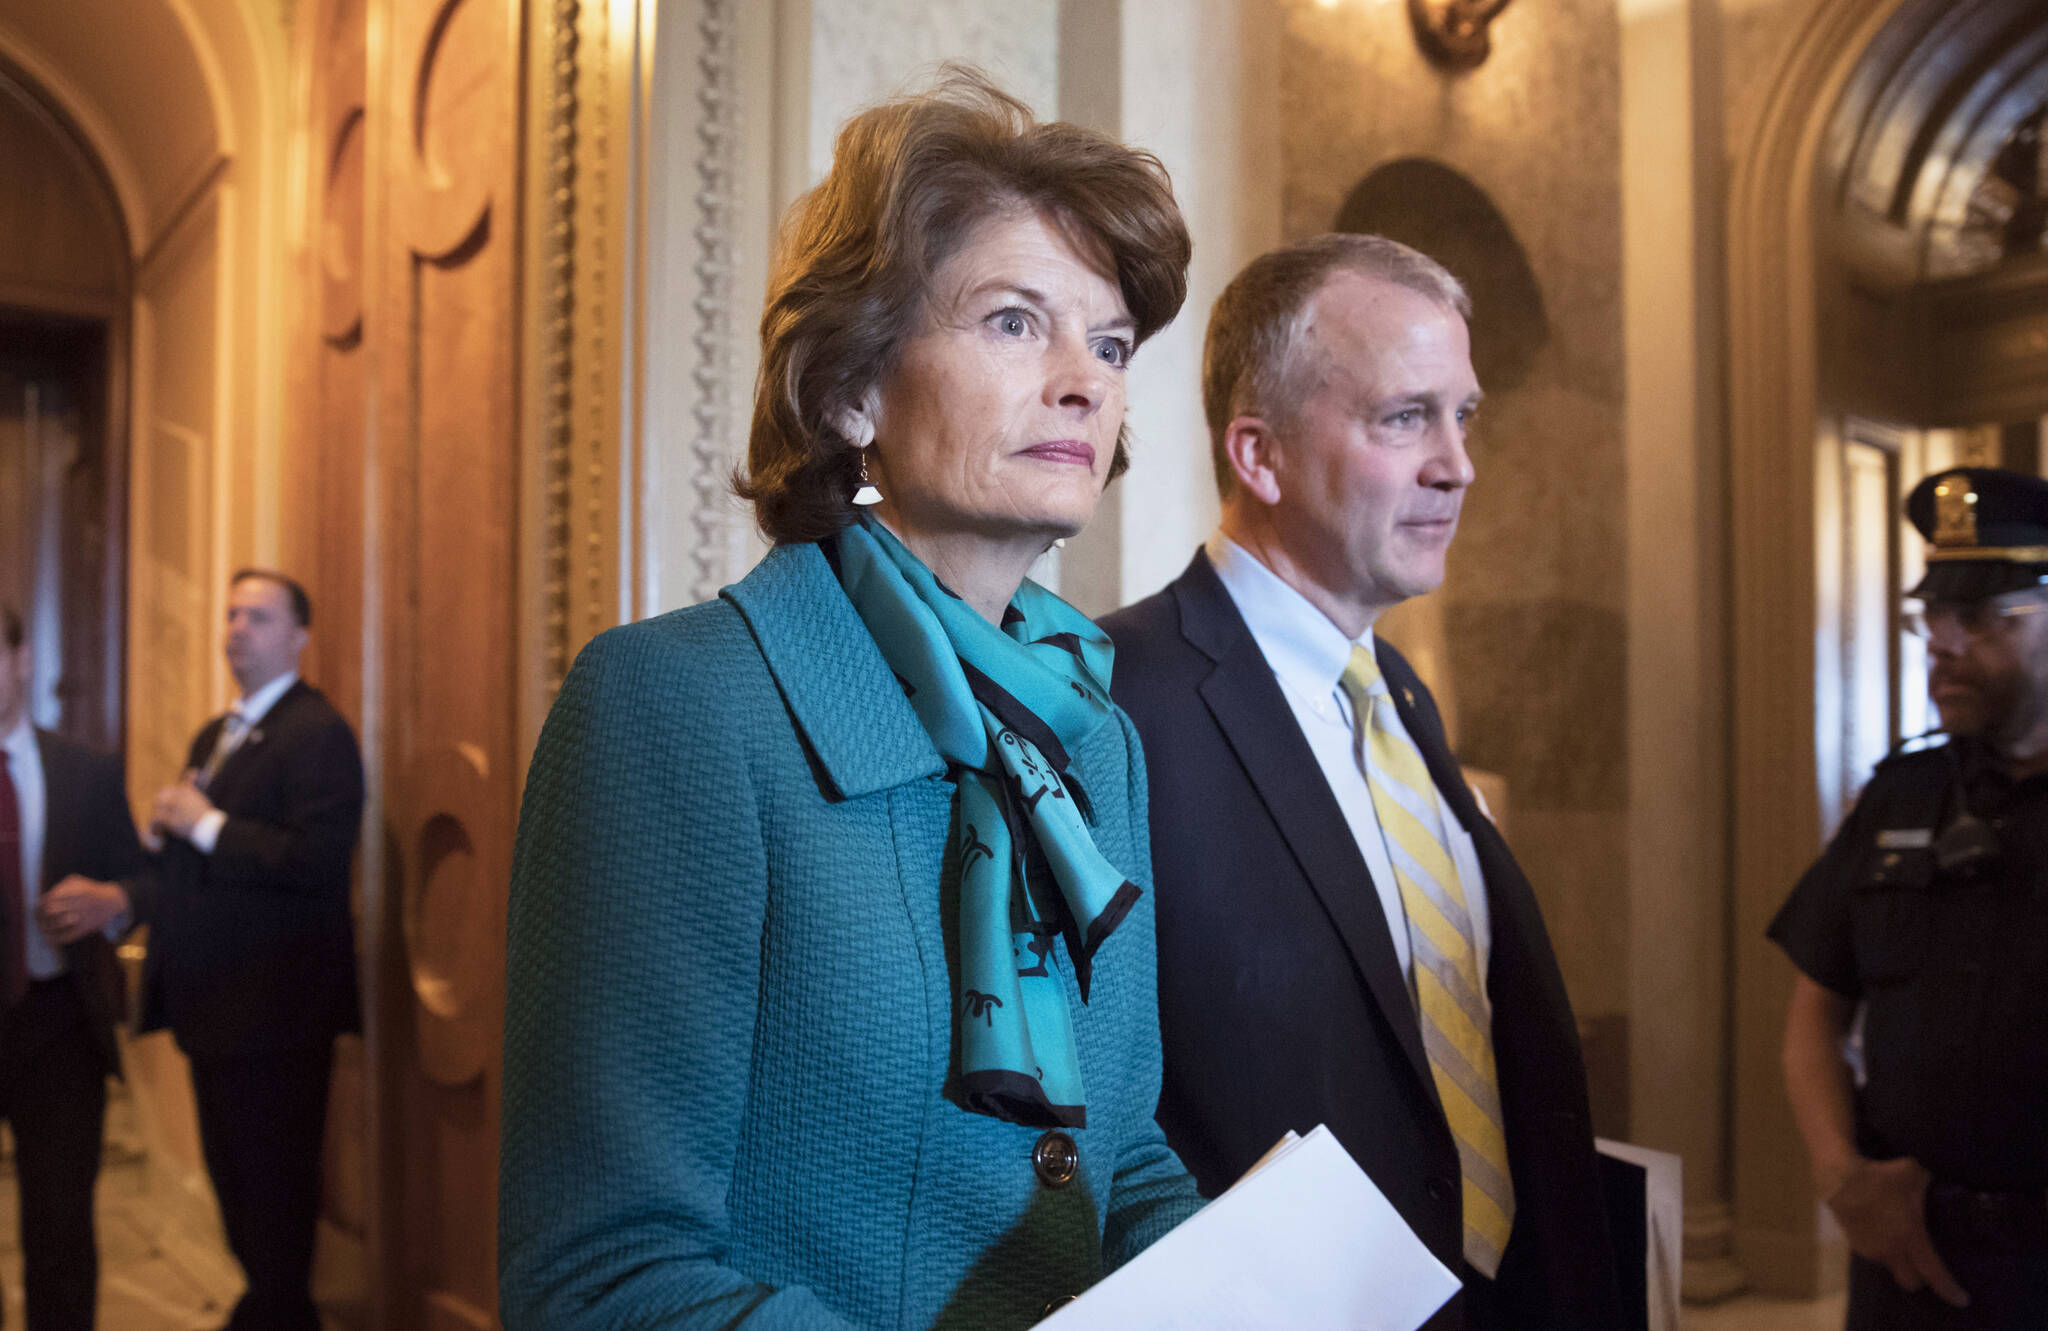 Sen. Lisa Murkowski, R-Alaska, and Sen. Dan Sullivan, R-Alaska, leave the chamber after a vote on Capitol Hill in Washington, early Wednesday, May 10, 2017. A magistrate ruled Tuesday, Oct. 19, 2021, that there is probable cause for a case to continue against a man accused of threatening to kill Alaska’s two U.S. senators in profanity-filled voicemails left on their office phones. (AP Photo / J. Scott Applewhite)